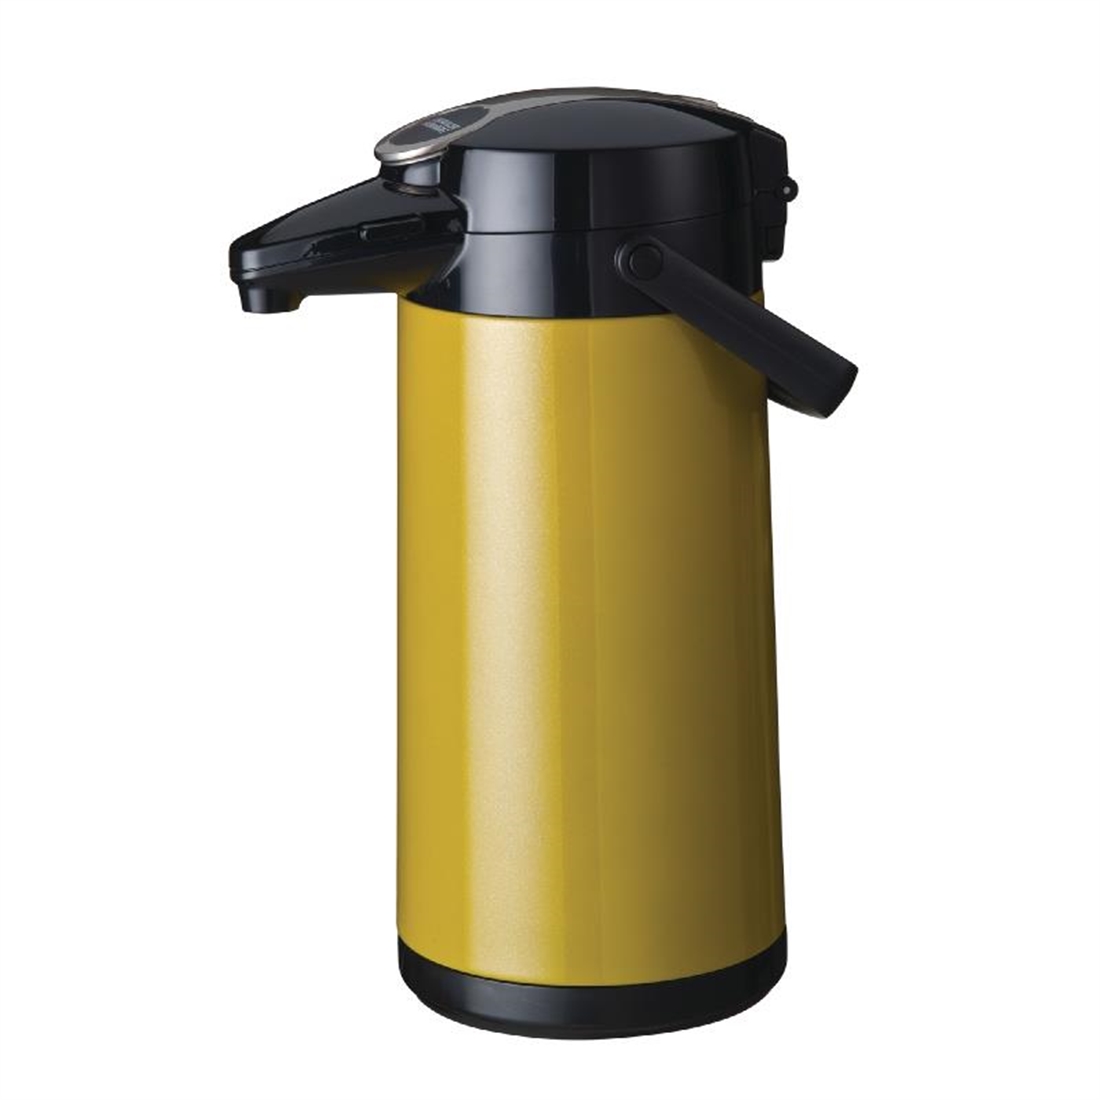 Bravilor Furento 2.2Ltr Airpot with Pump Action Metalic Yellow